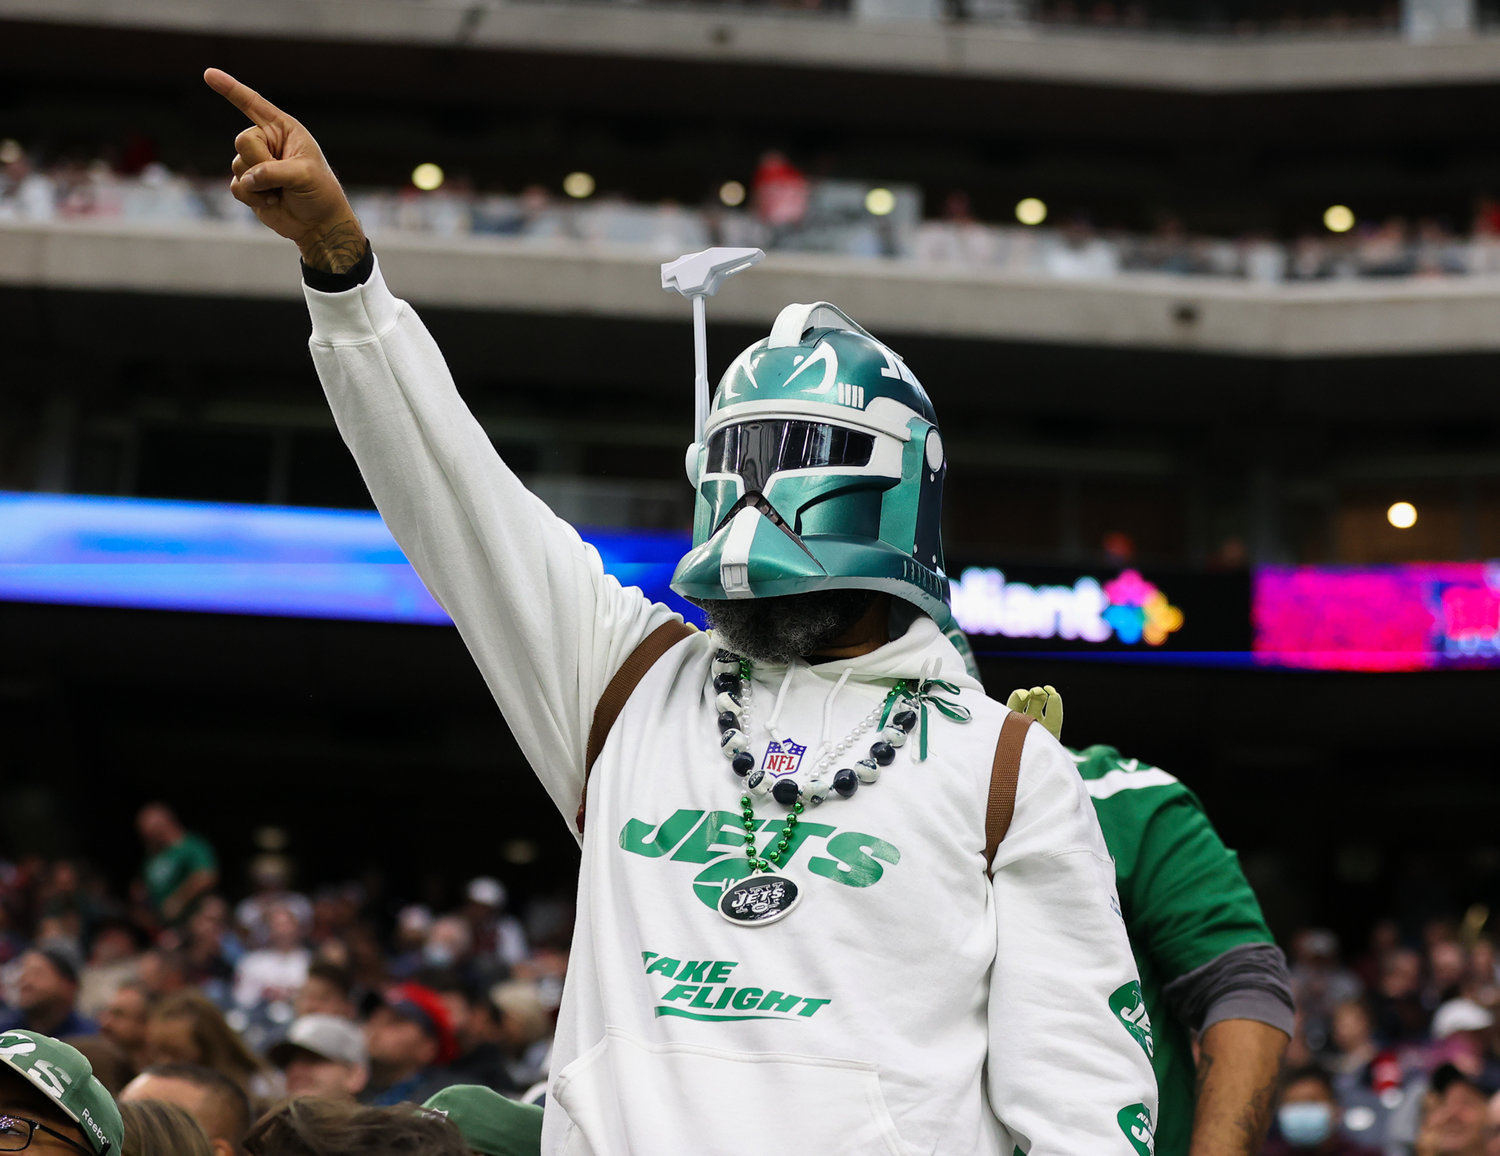 A New York Jets fan during an NFL game between the Houston Texans and the New York Jets on November 28, 2021 in Houston, Texas. The Jets won, 21-14